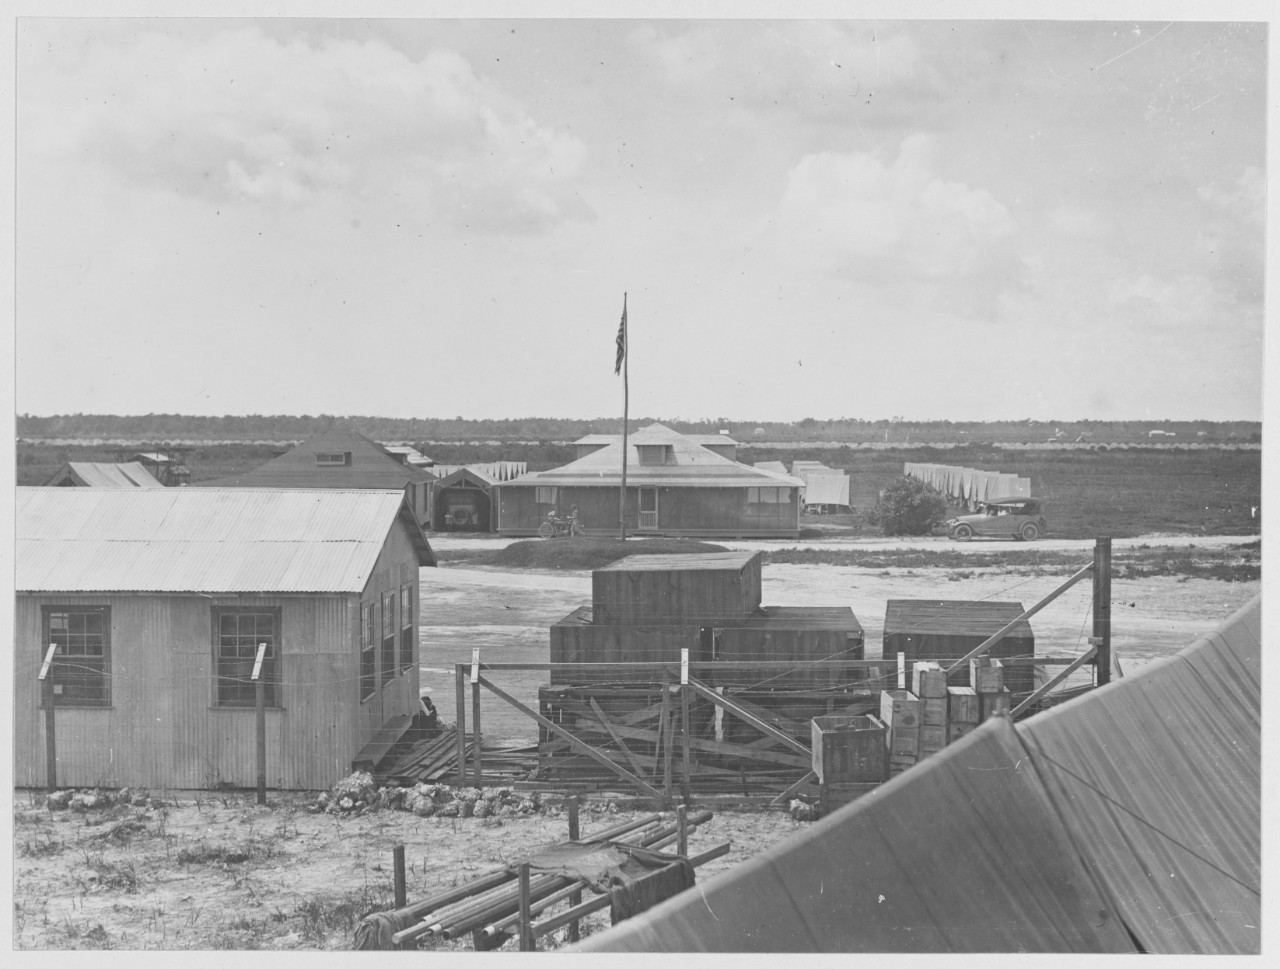 Showing Post Exchange, Headquarters, Gunnery School, and Cadet Officers Quarters.